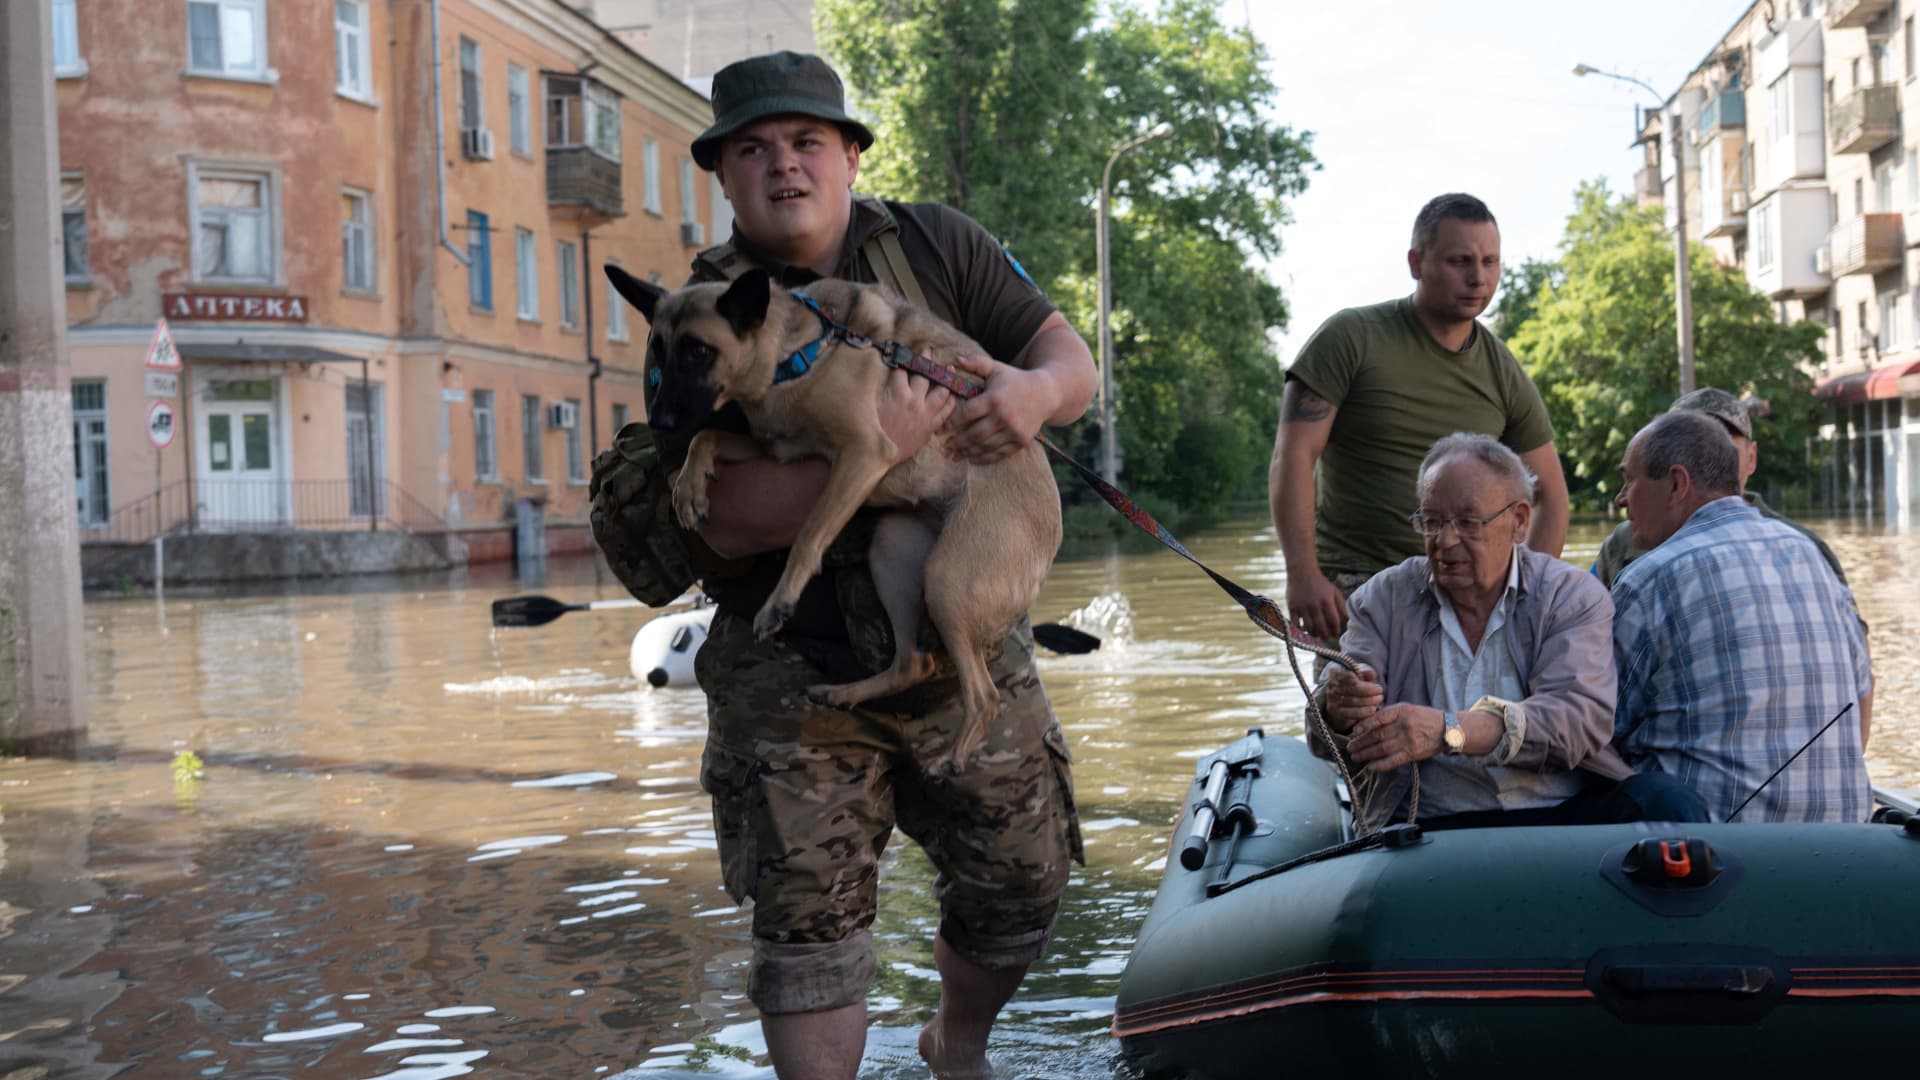 Ukrainian servicemen help local residents during an evacuation from a flooded area in Kherson on June 7, 2023, following damages sustained at the Kakhovka hydroelectric power plant dam. Ukraine was evacuating thousands of people on June 7 after an attack on a major Russian-held dam unleashed a torrent of water, inundating two dozen villages and sparking fears of a humanitarian disaster.